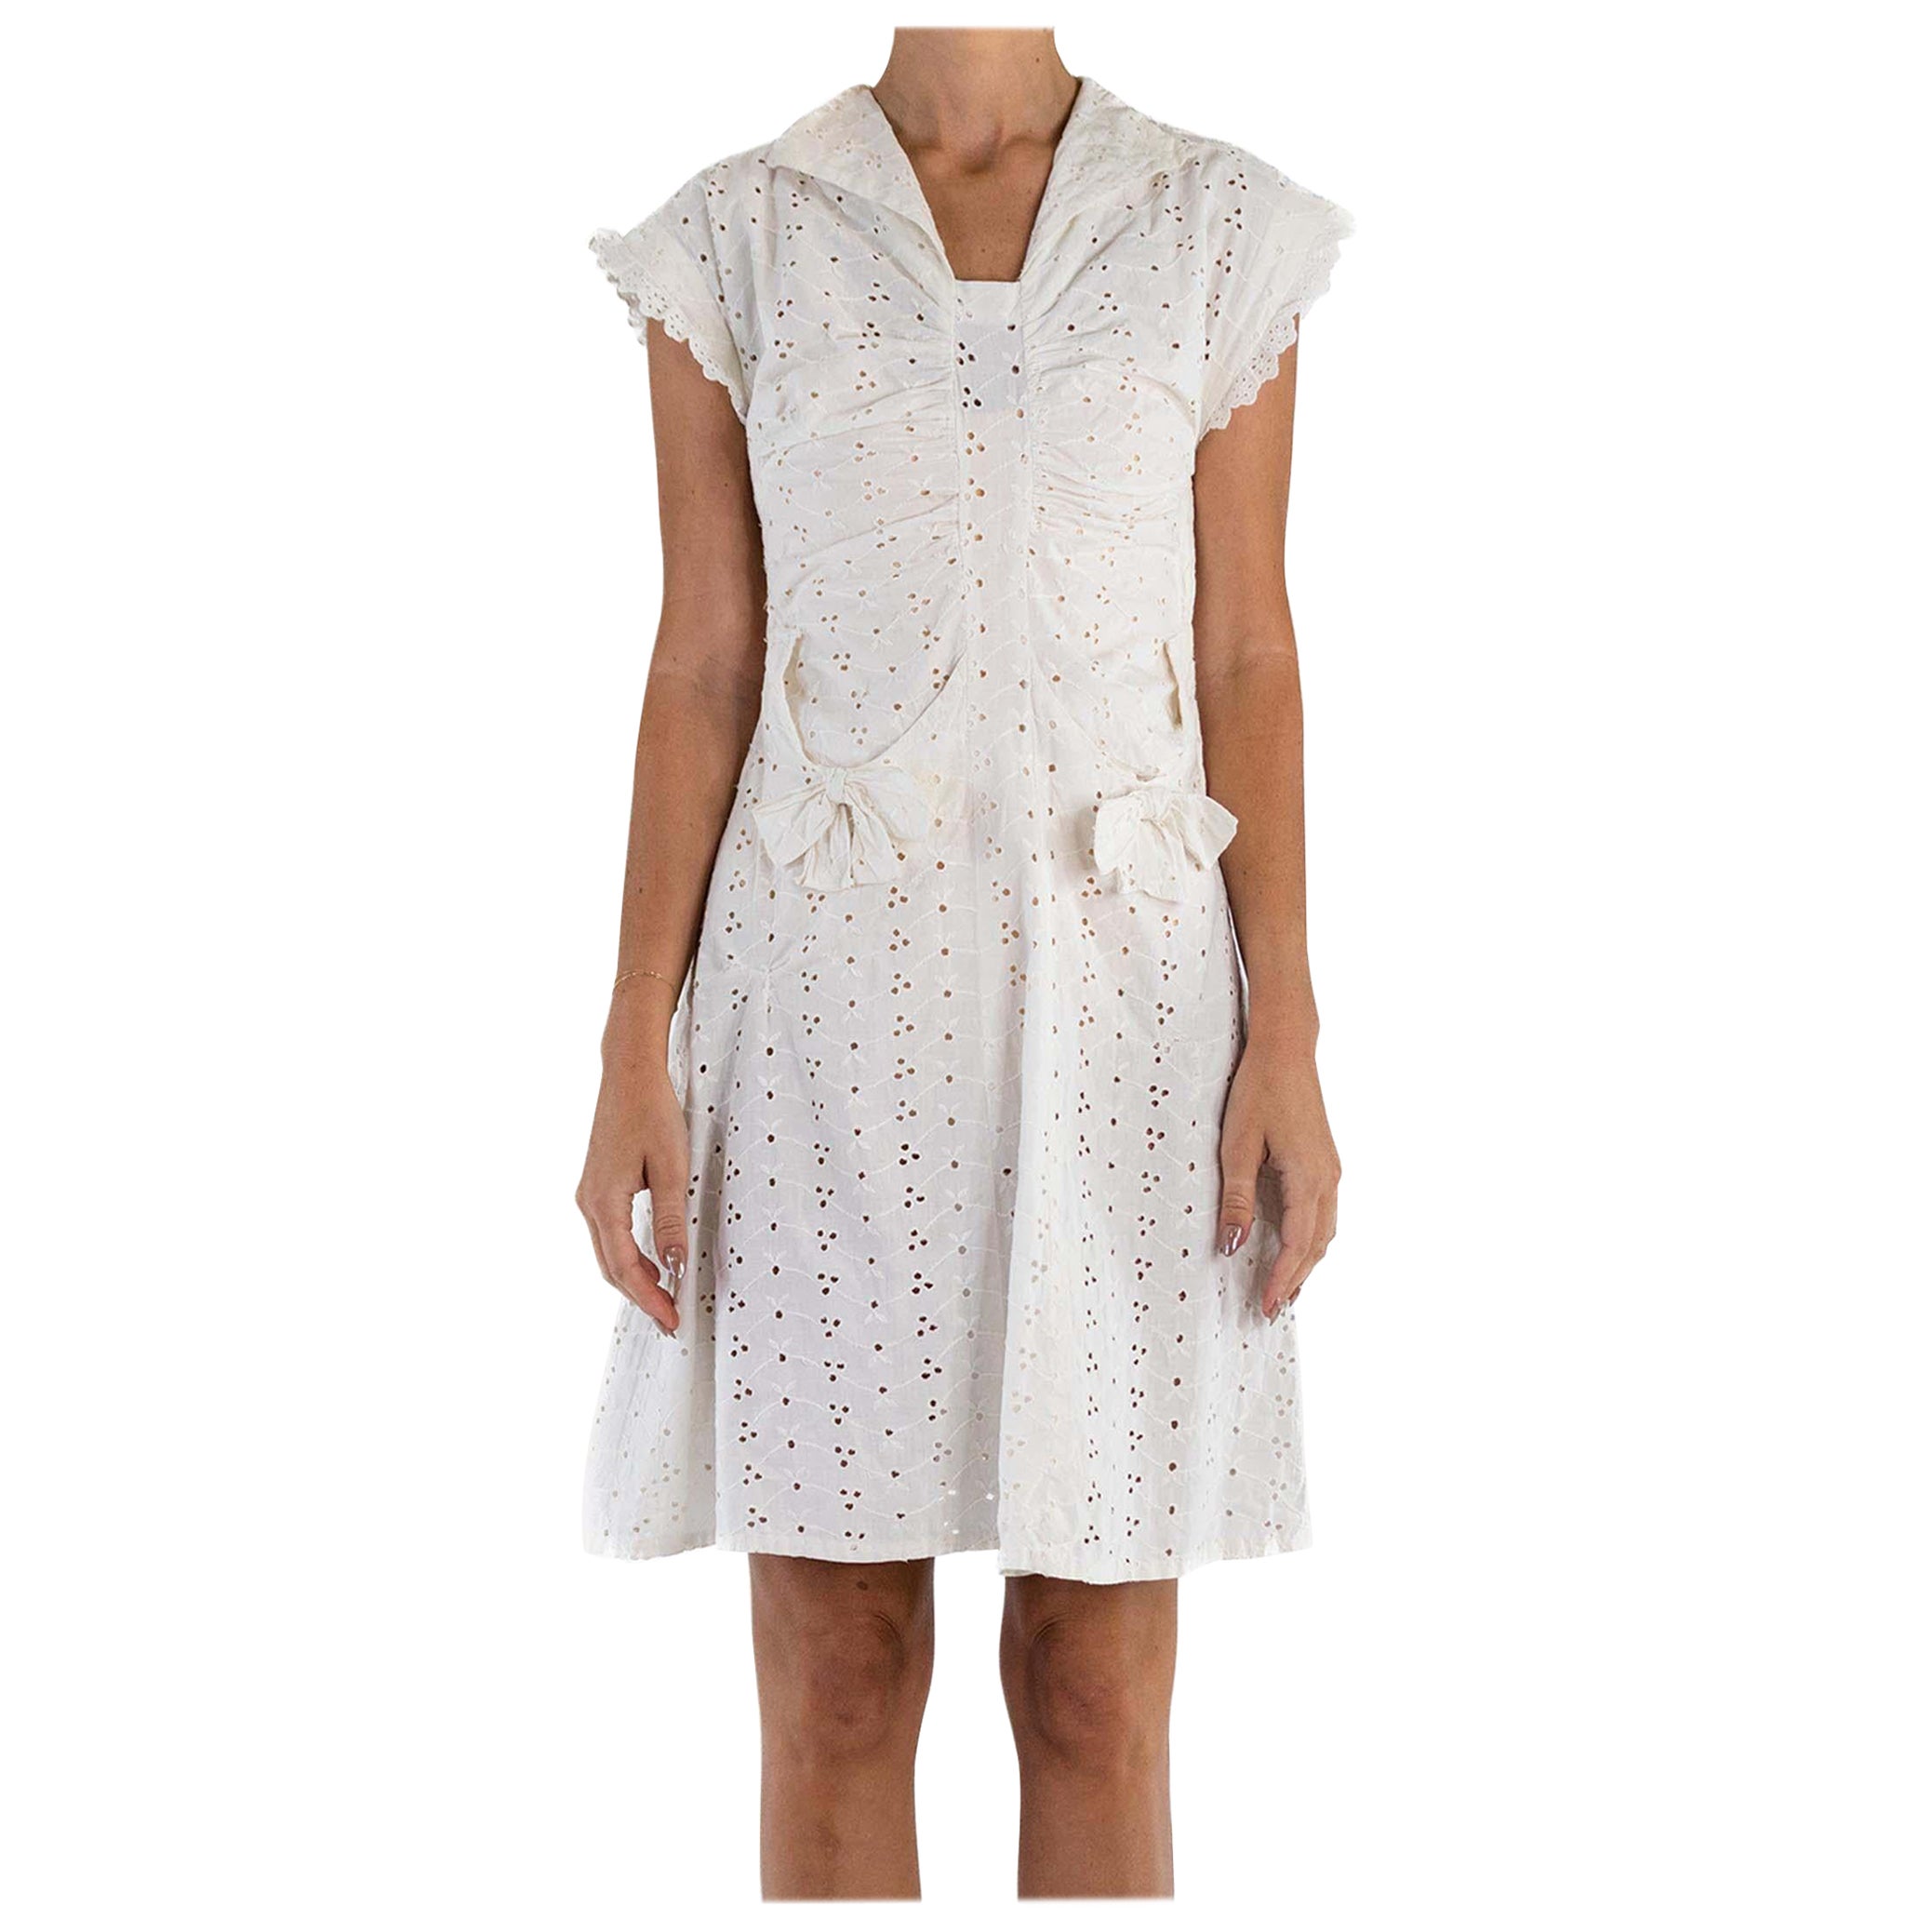 1930S White Cotton Eyelet Lace Cute Little Dress With Bow Pockets For Sale